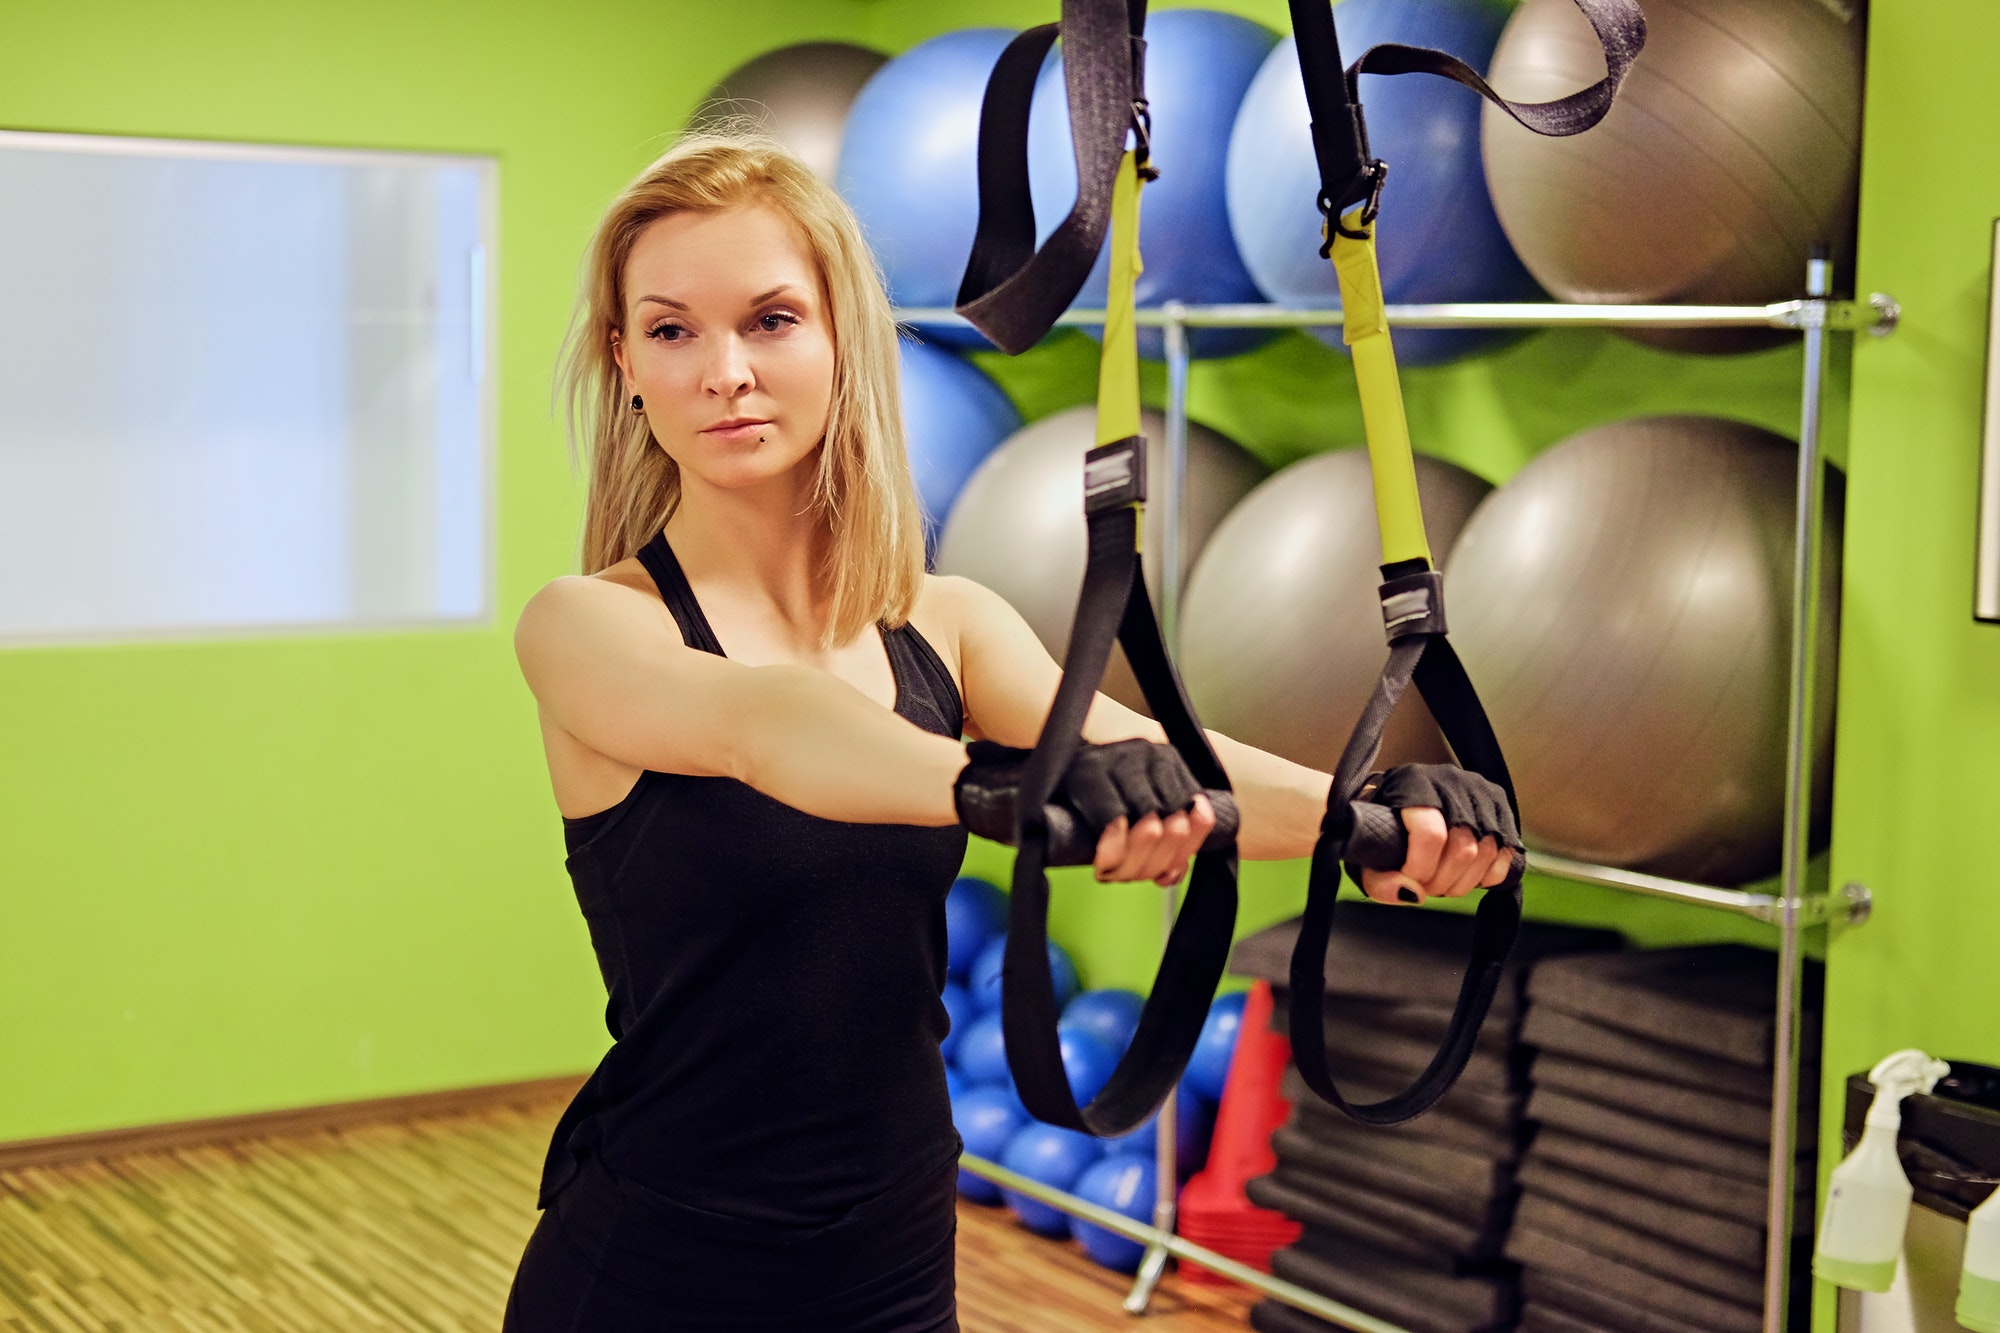 Slim female doing trx straps exercises in a gym.